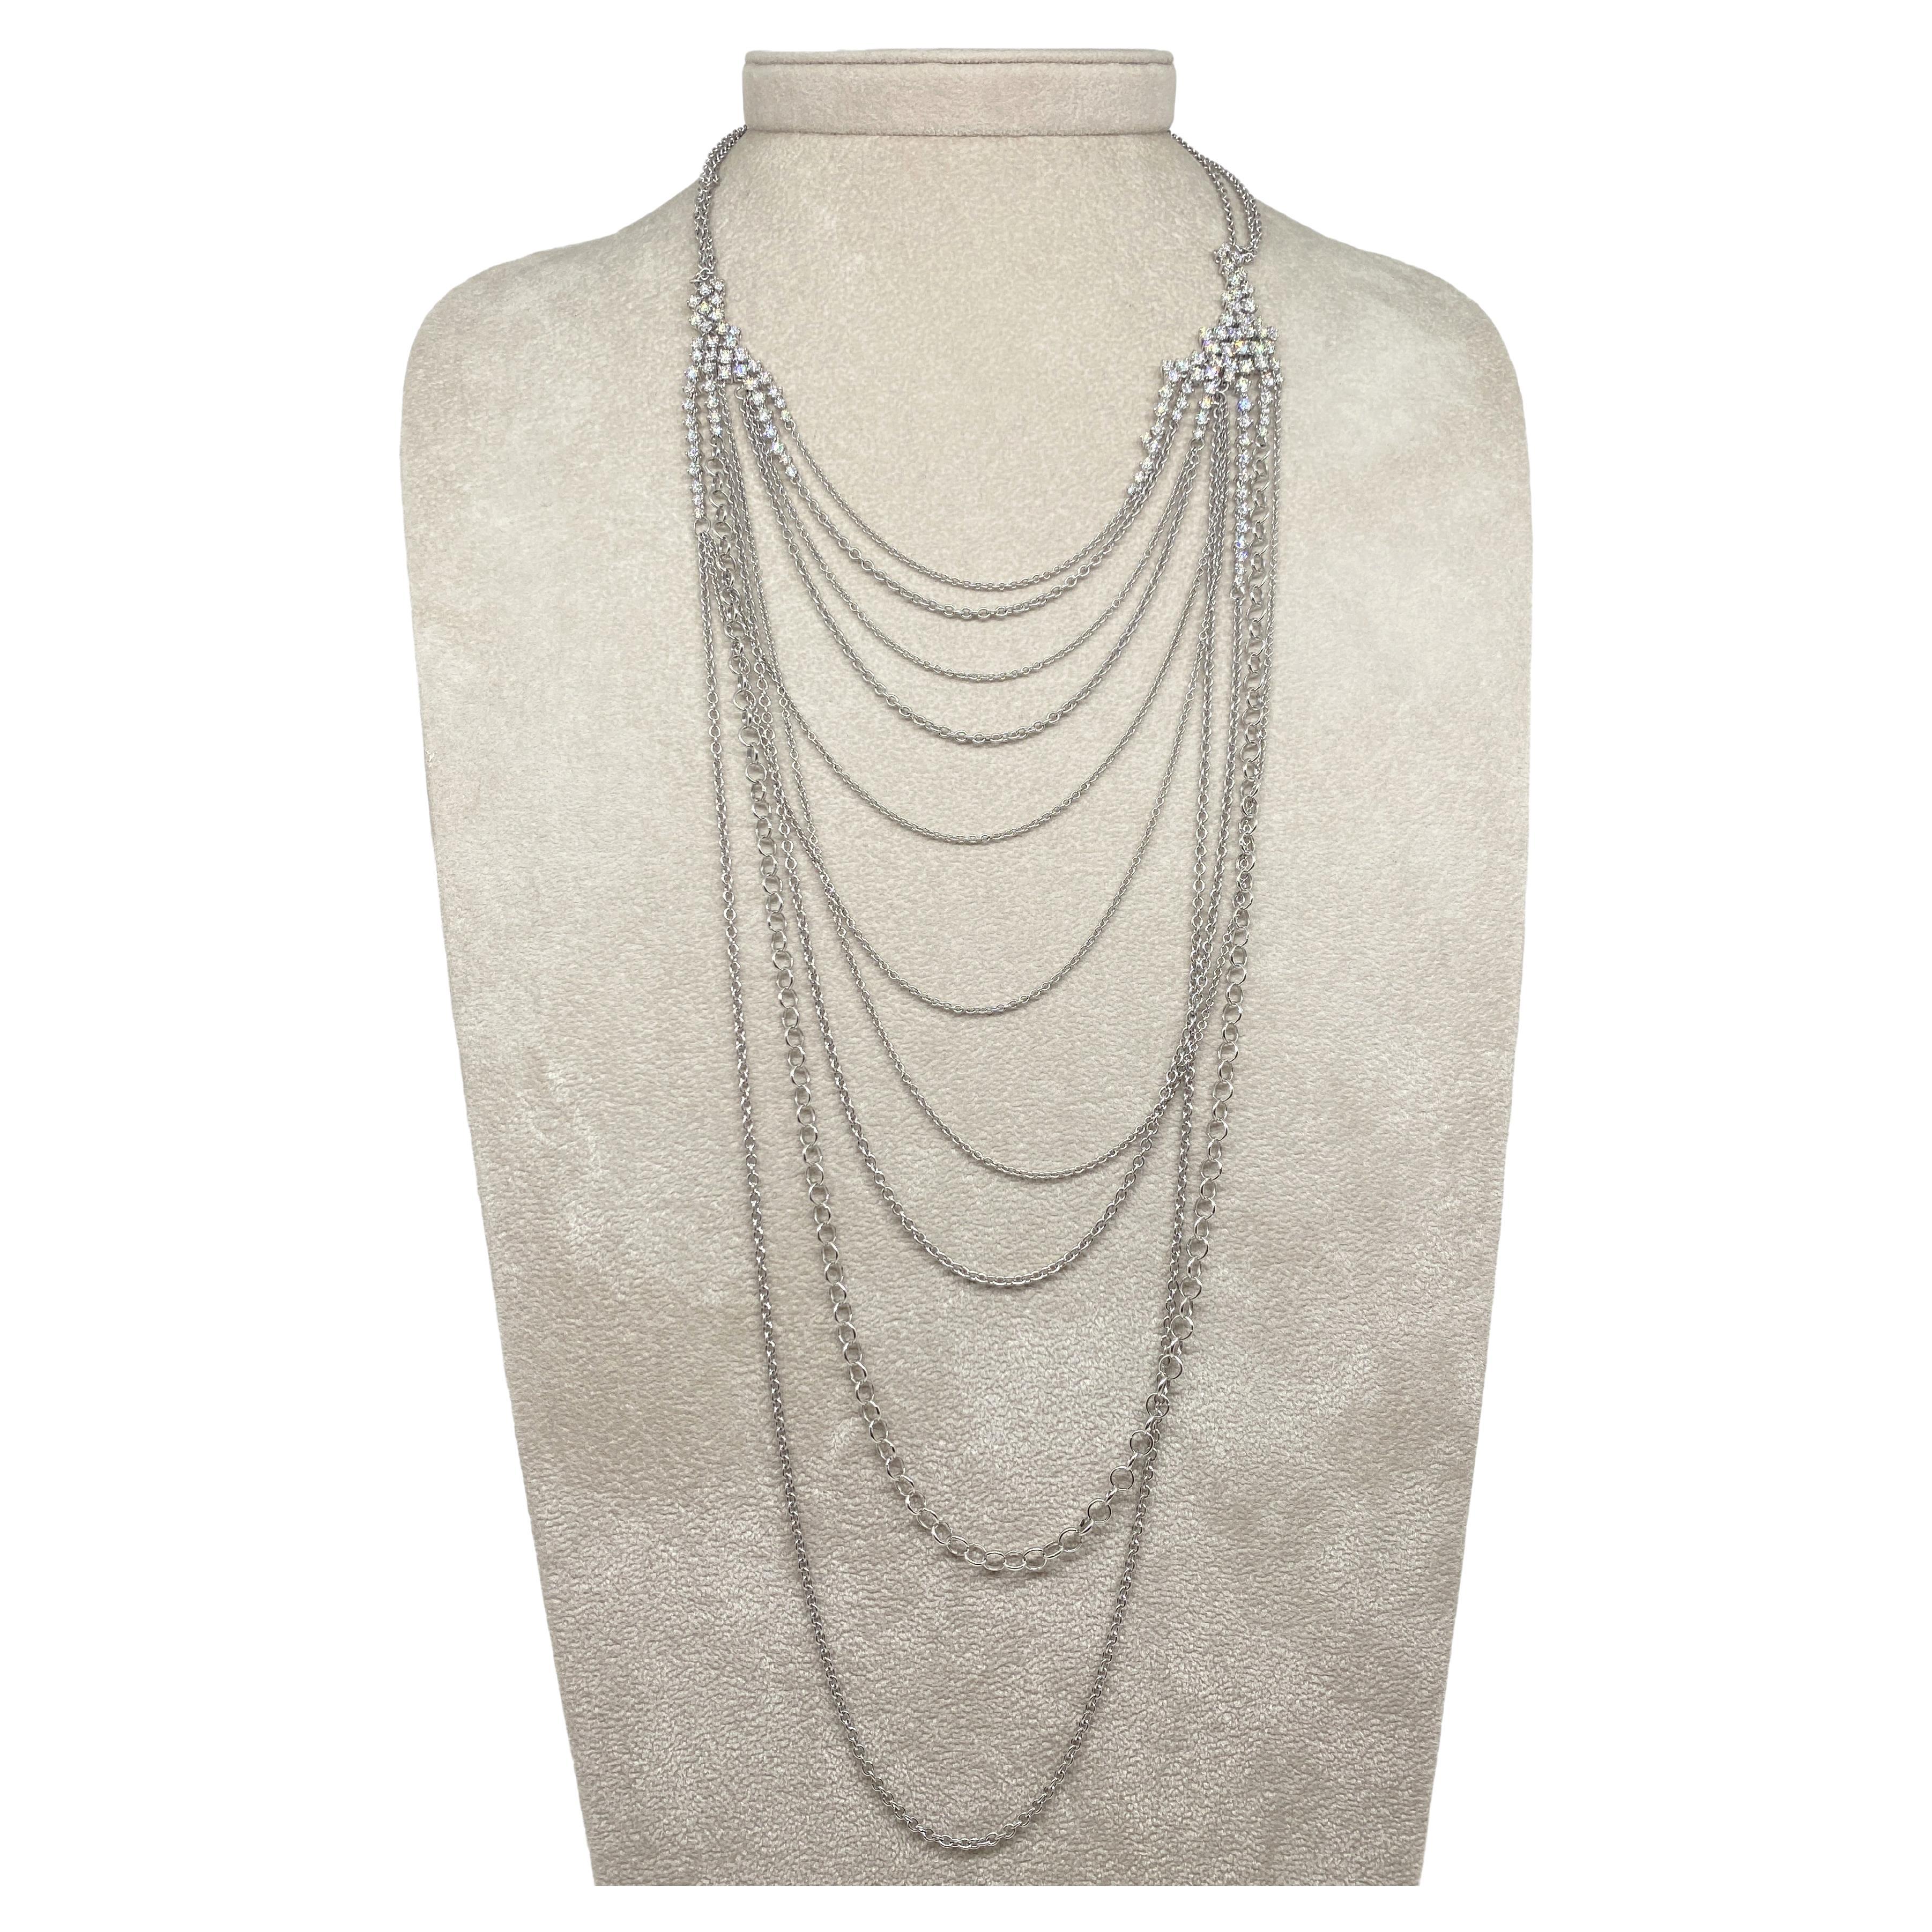 18k White Gold Fratelli Staurino Signed Long Necklace 4.18ct White Diamonds For Sale